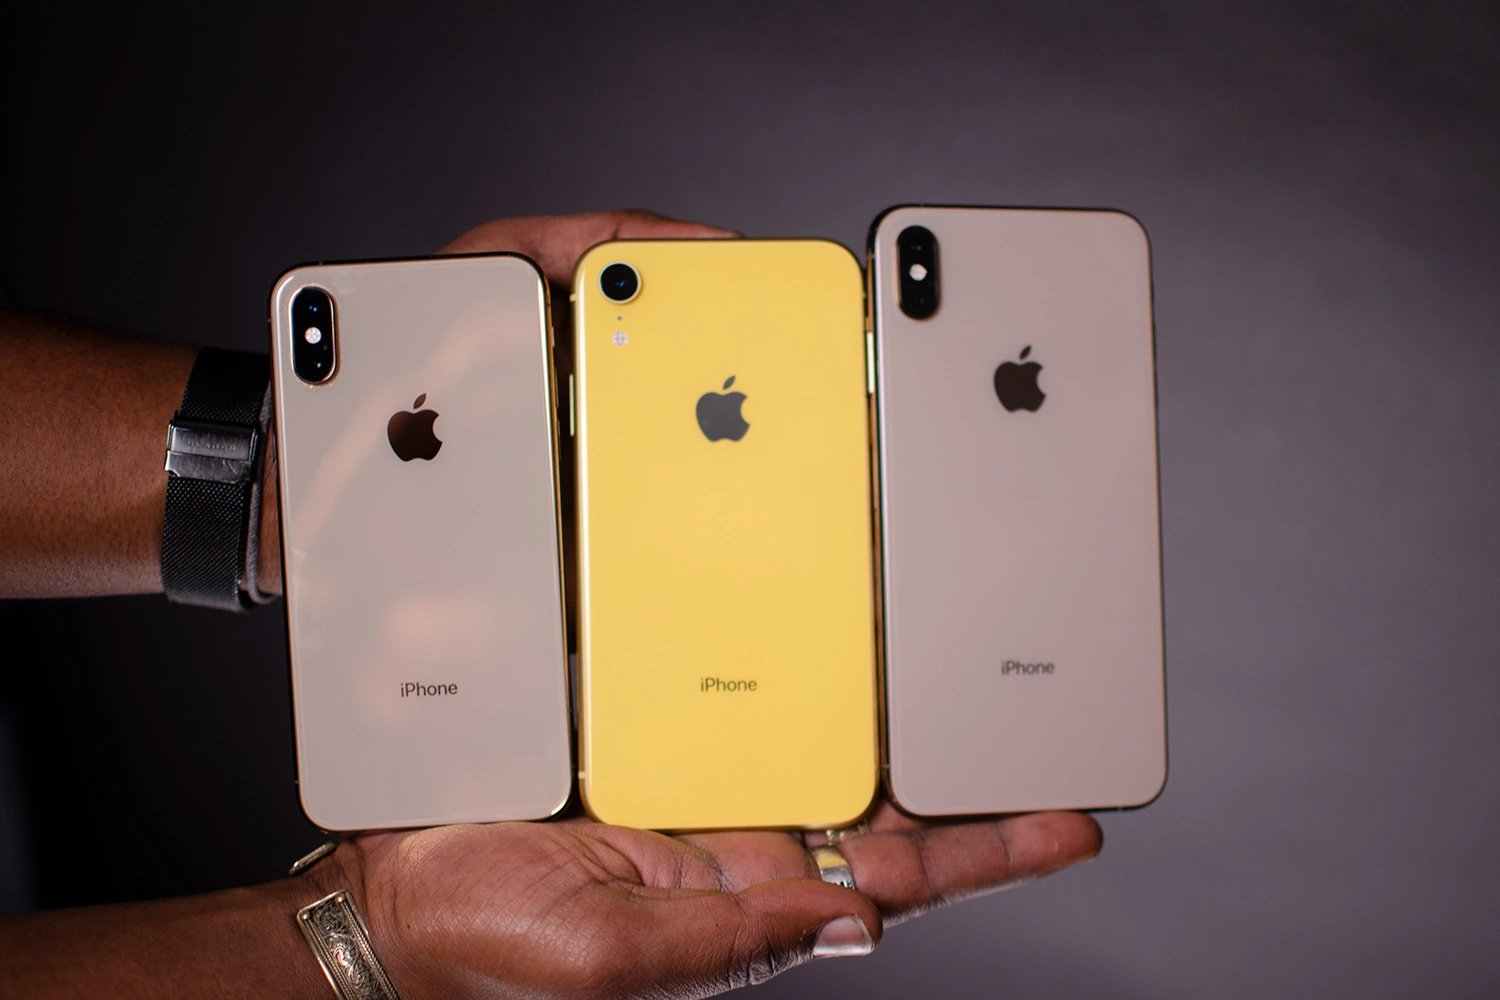 apple-website-confirms-iphone-xs-iphone-xs-max-and-iphone-xr